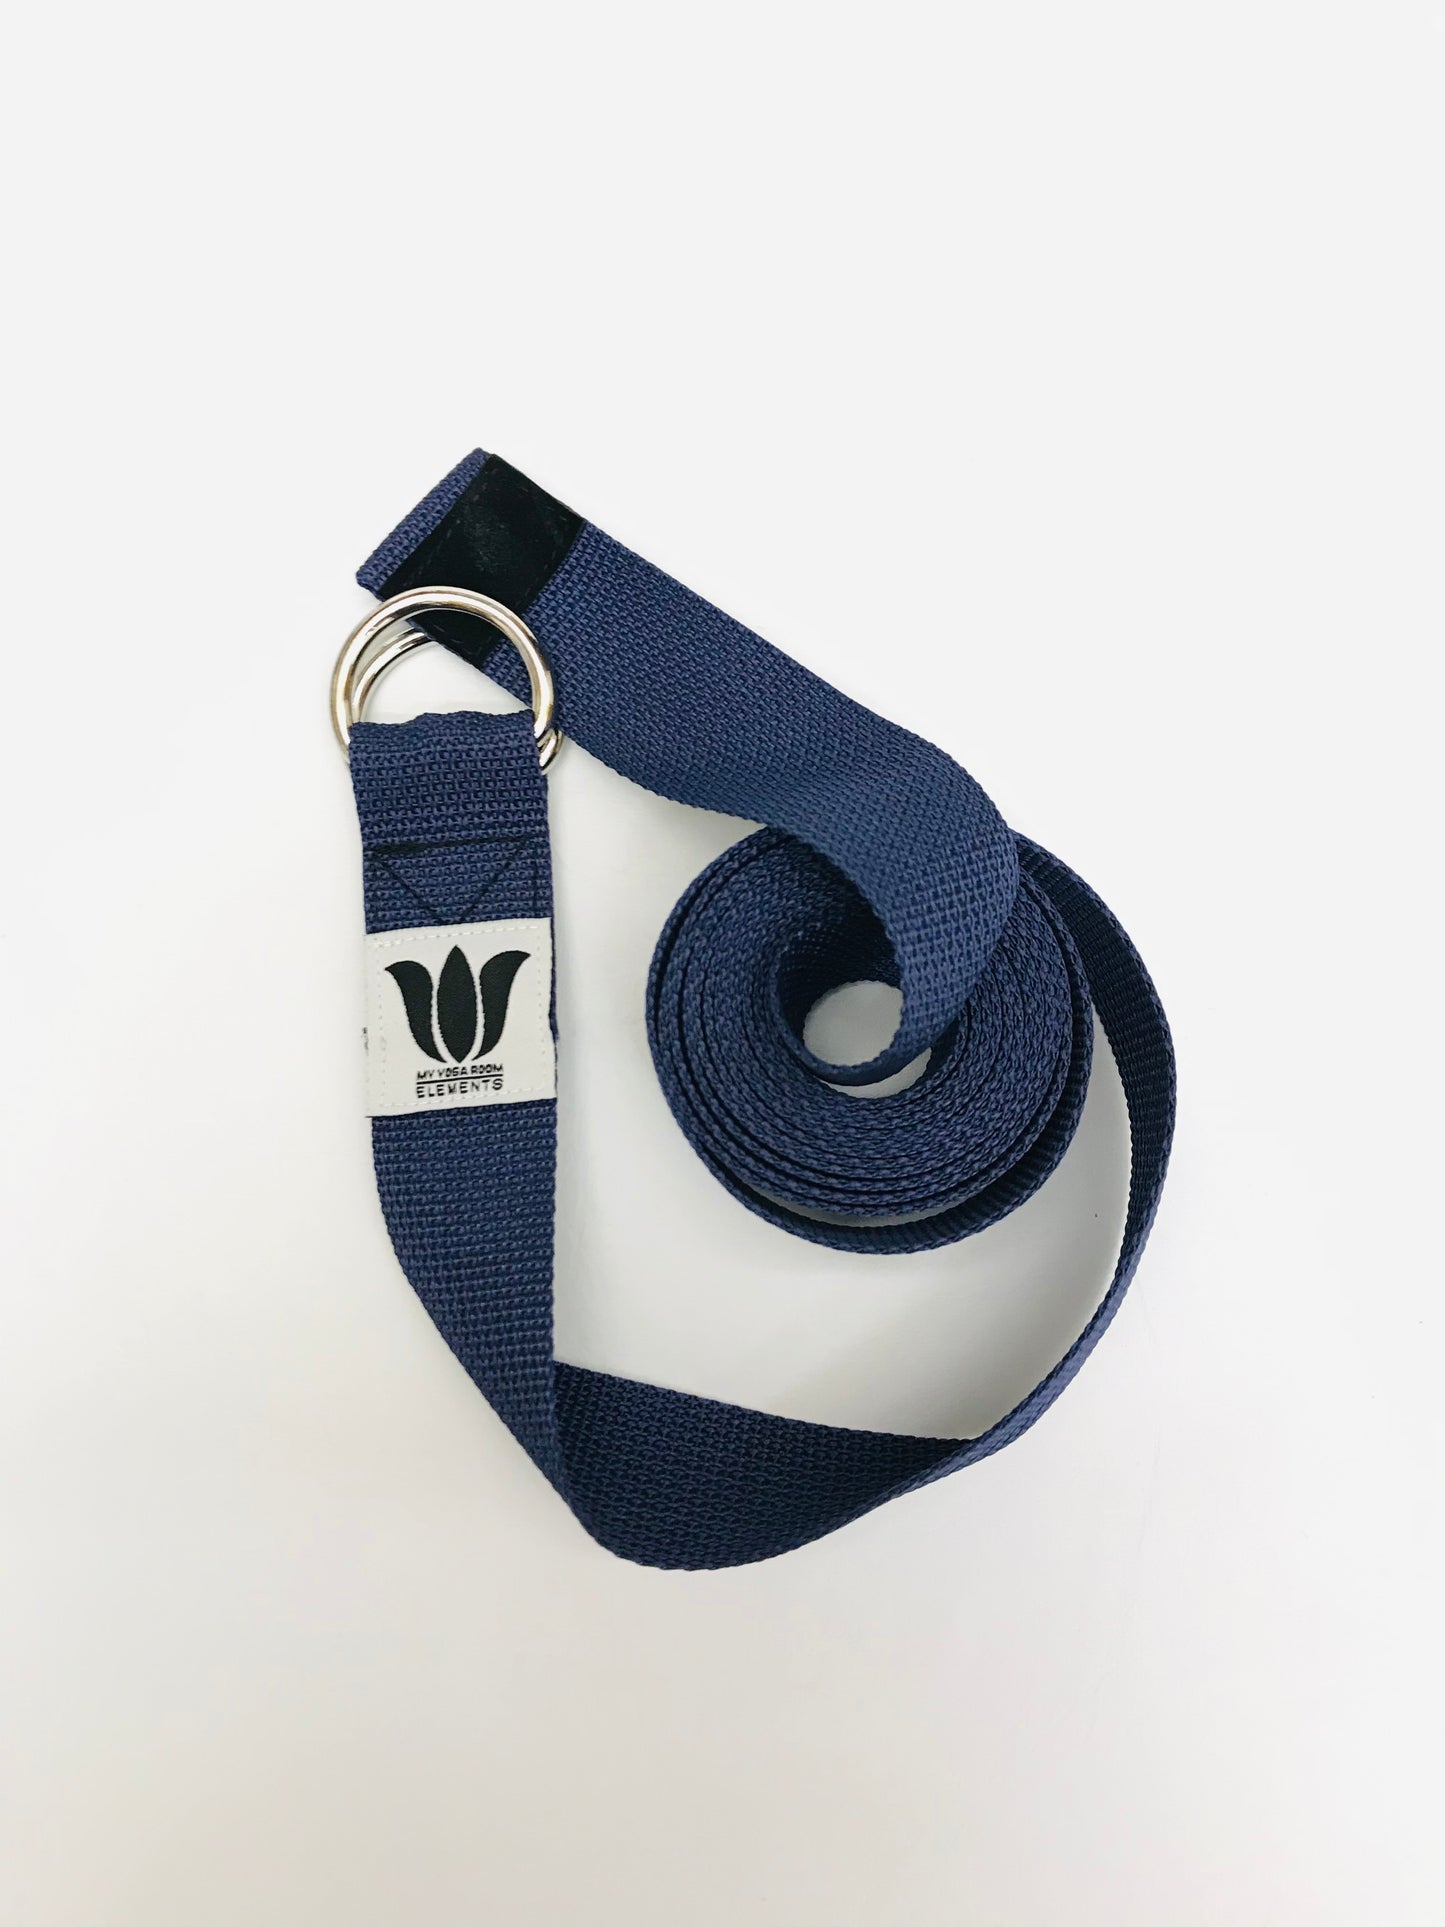 Made in Canada, blue webbing yoga strap. Yoga prop for beginners to align the spine and assist in yoga poses.